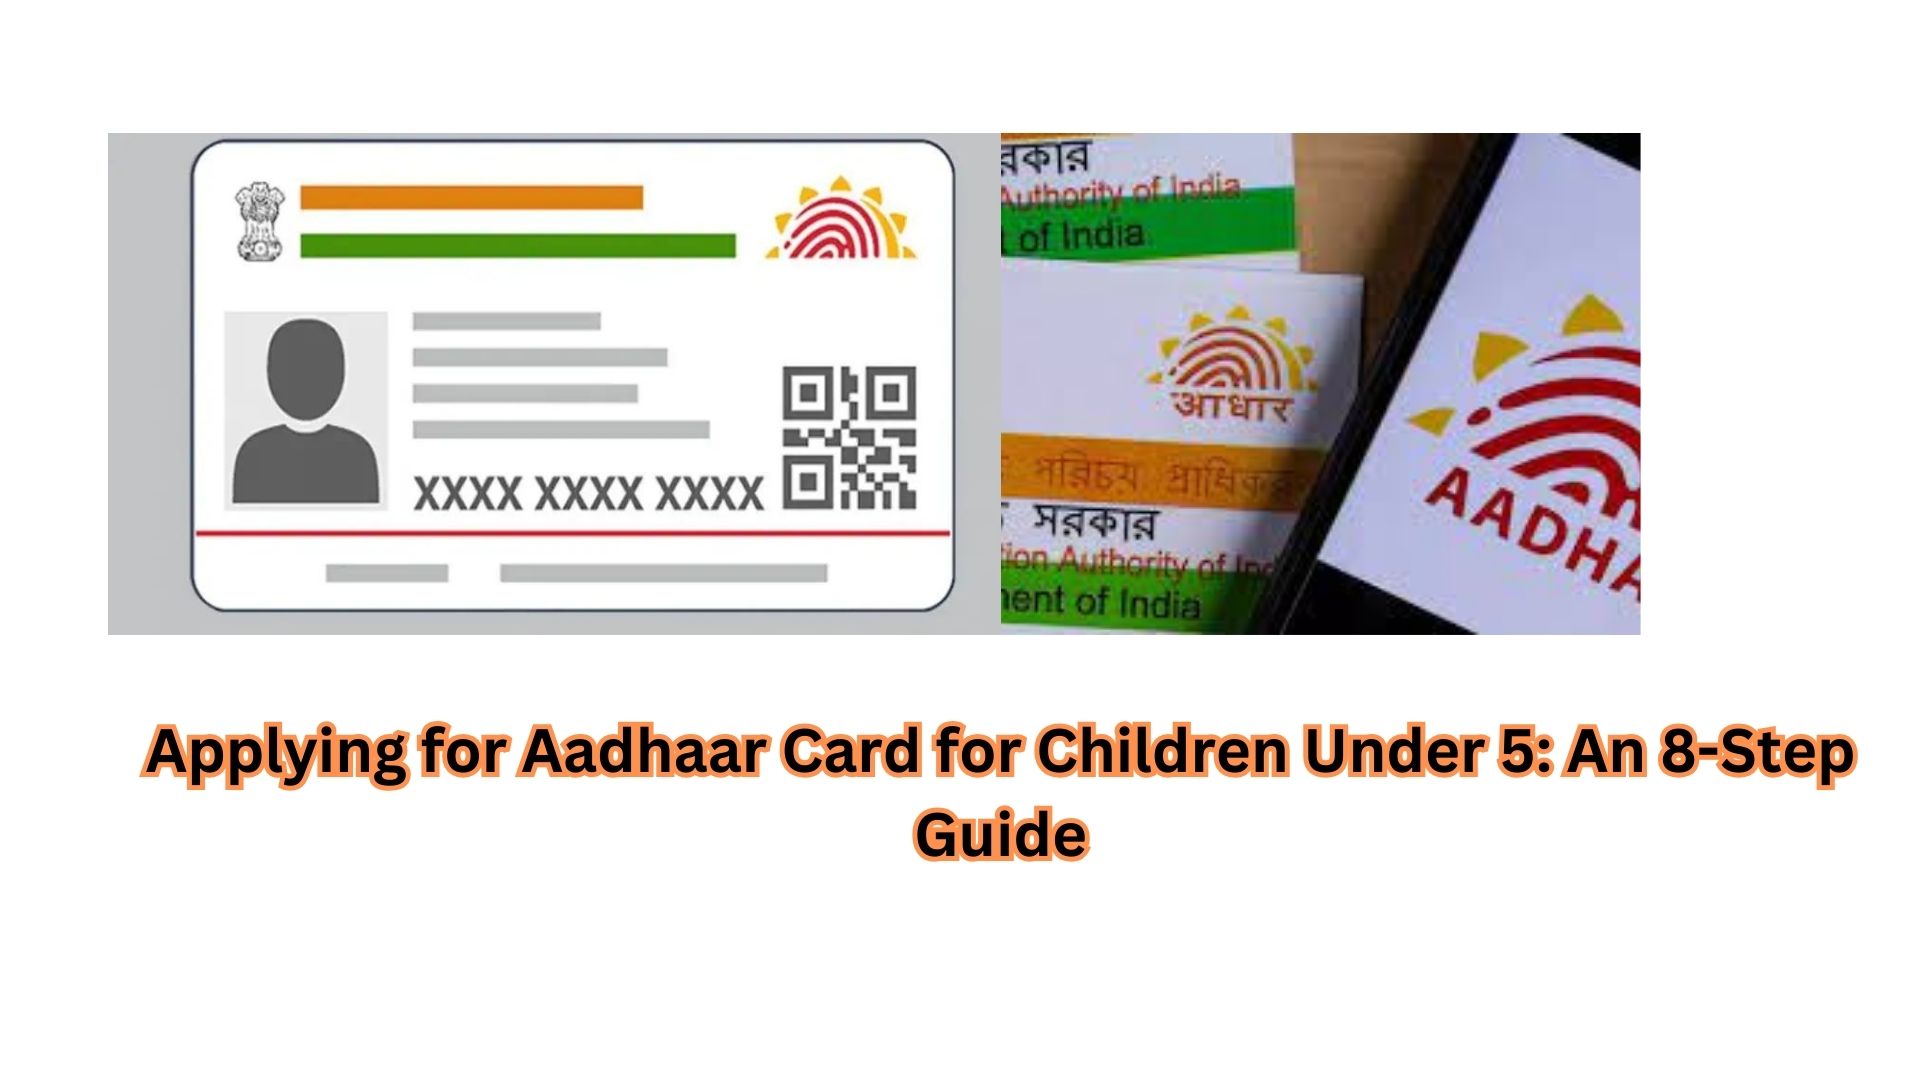 Applying for Aadhaar Card for Children Under 5: An 8-Step Guide